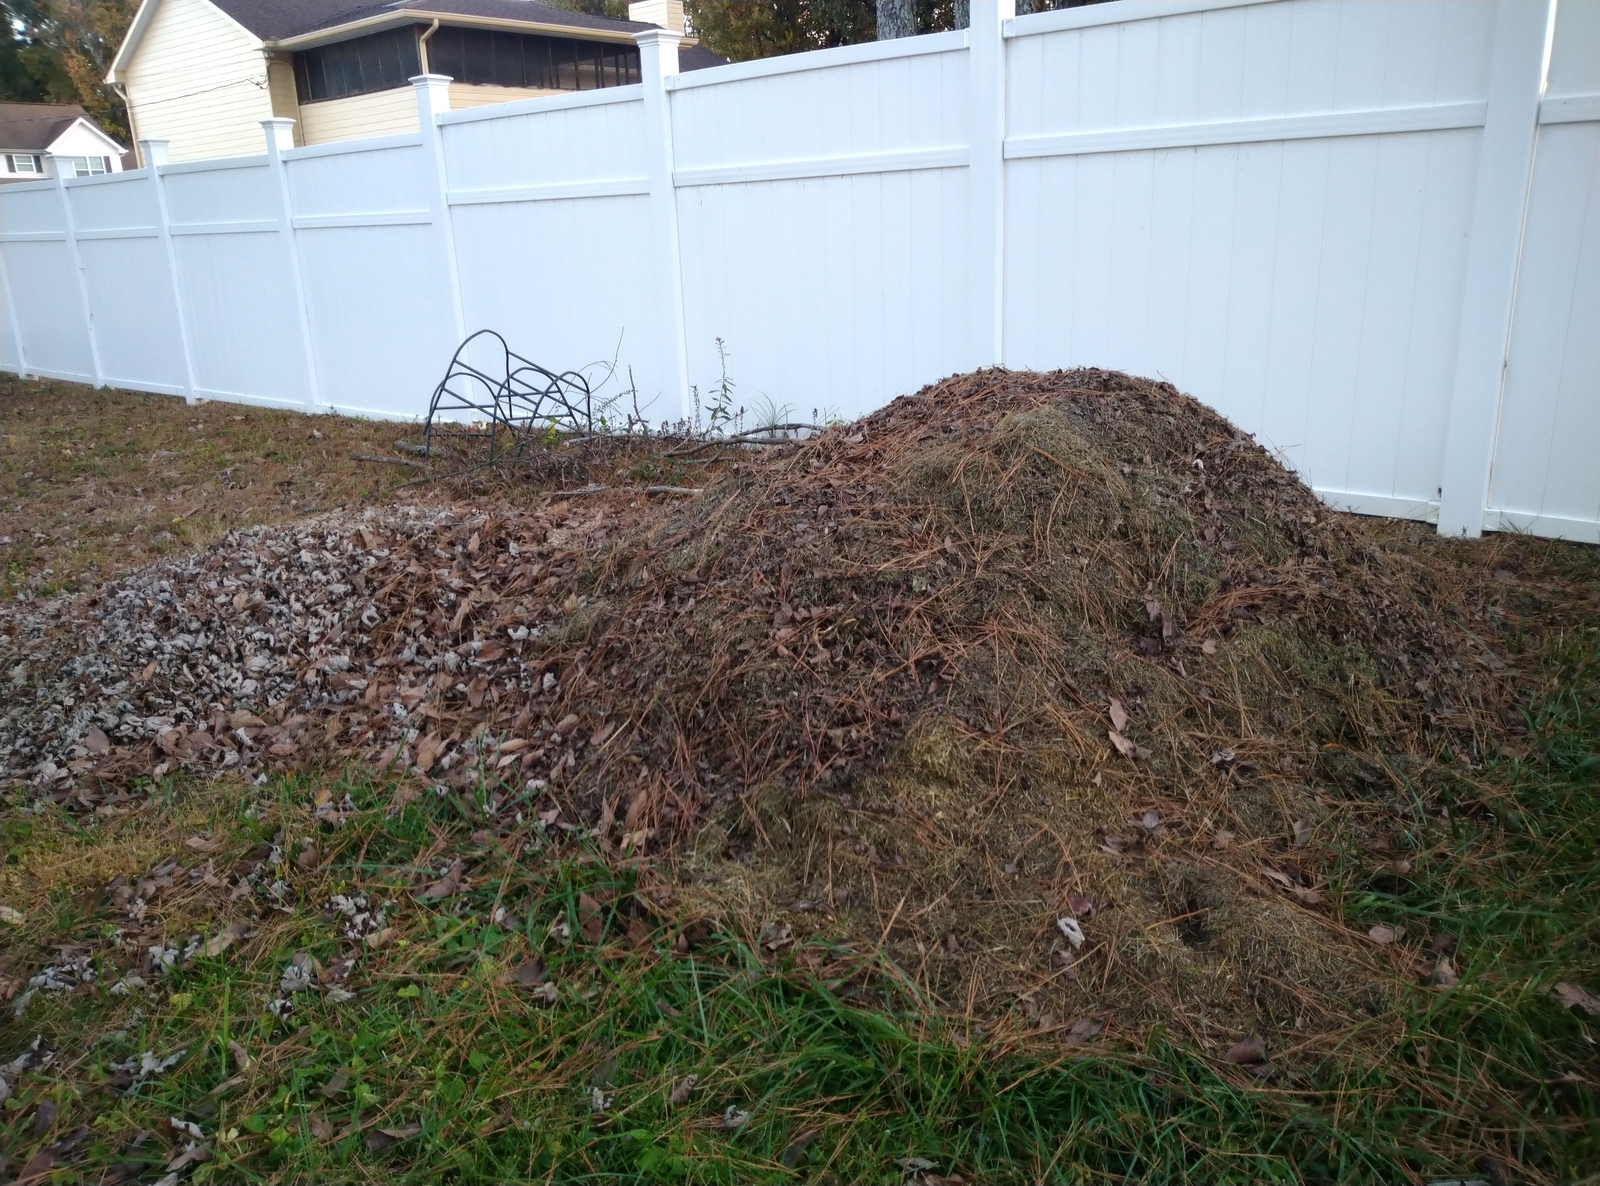 Pile of composting material outside bin